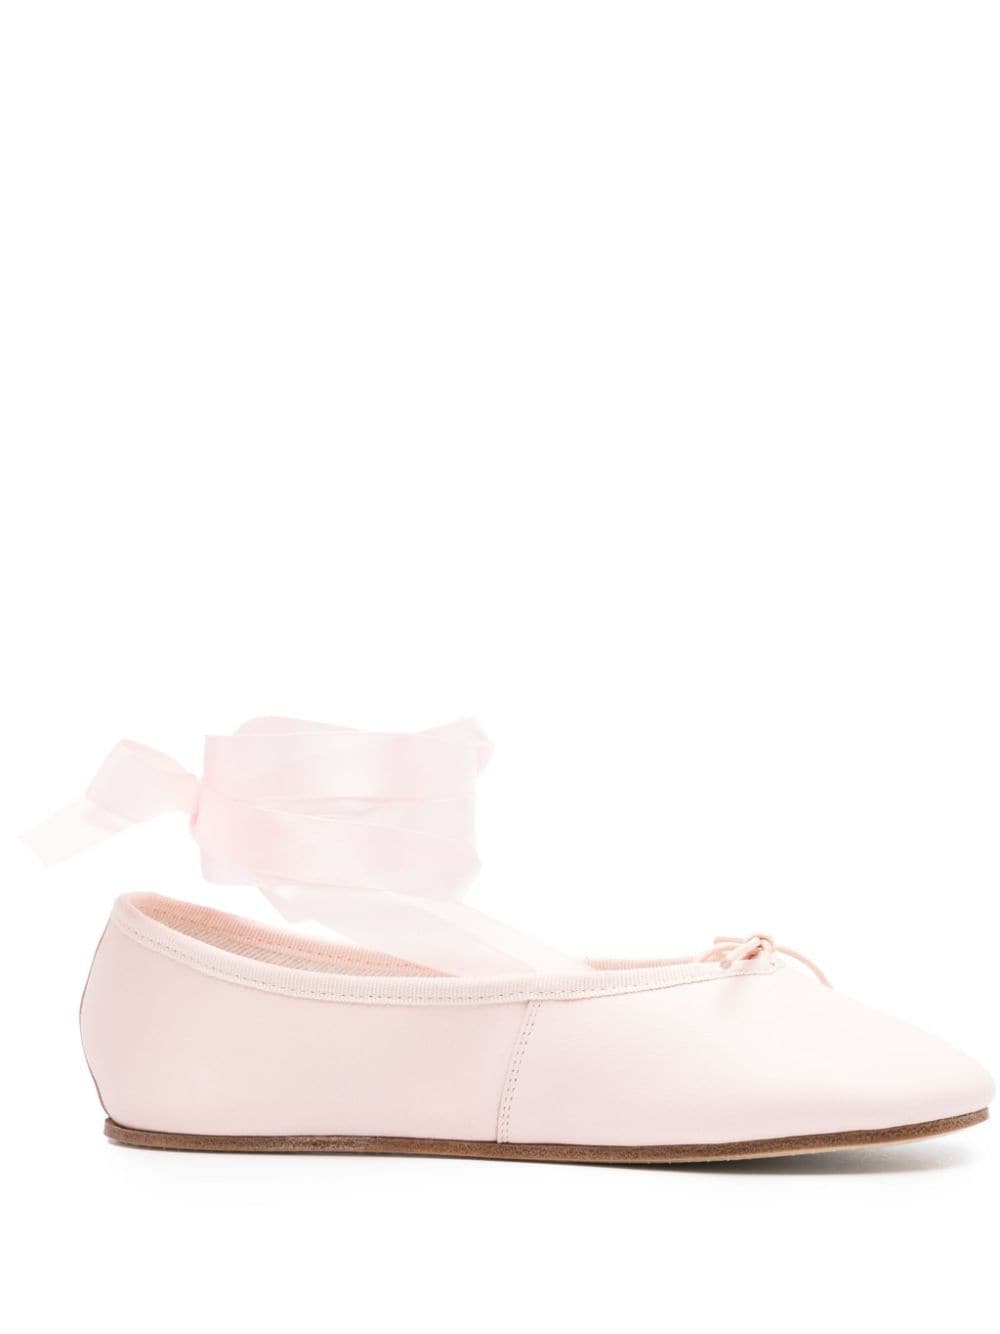 Shop Repetto Sophia Leather Ballerina Shoes In Pink